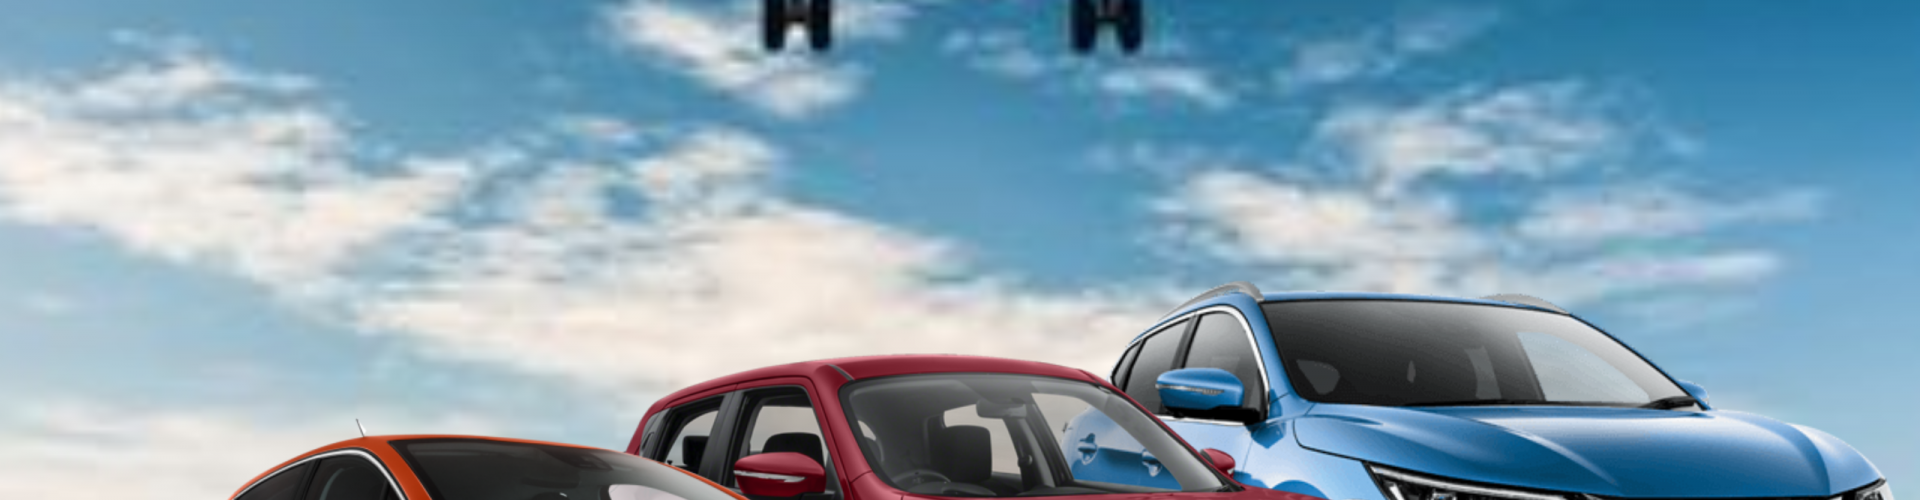 airport-cars.png